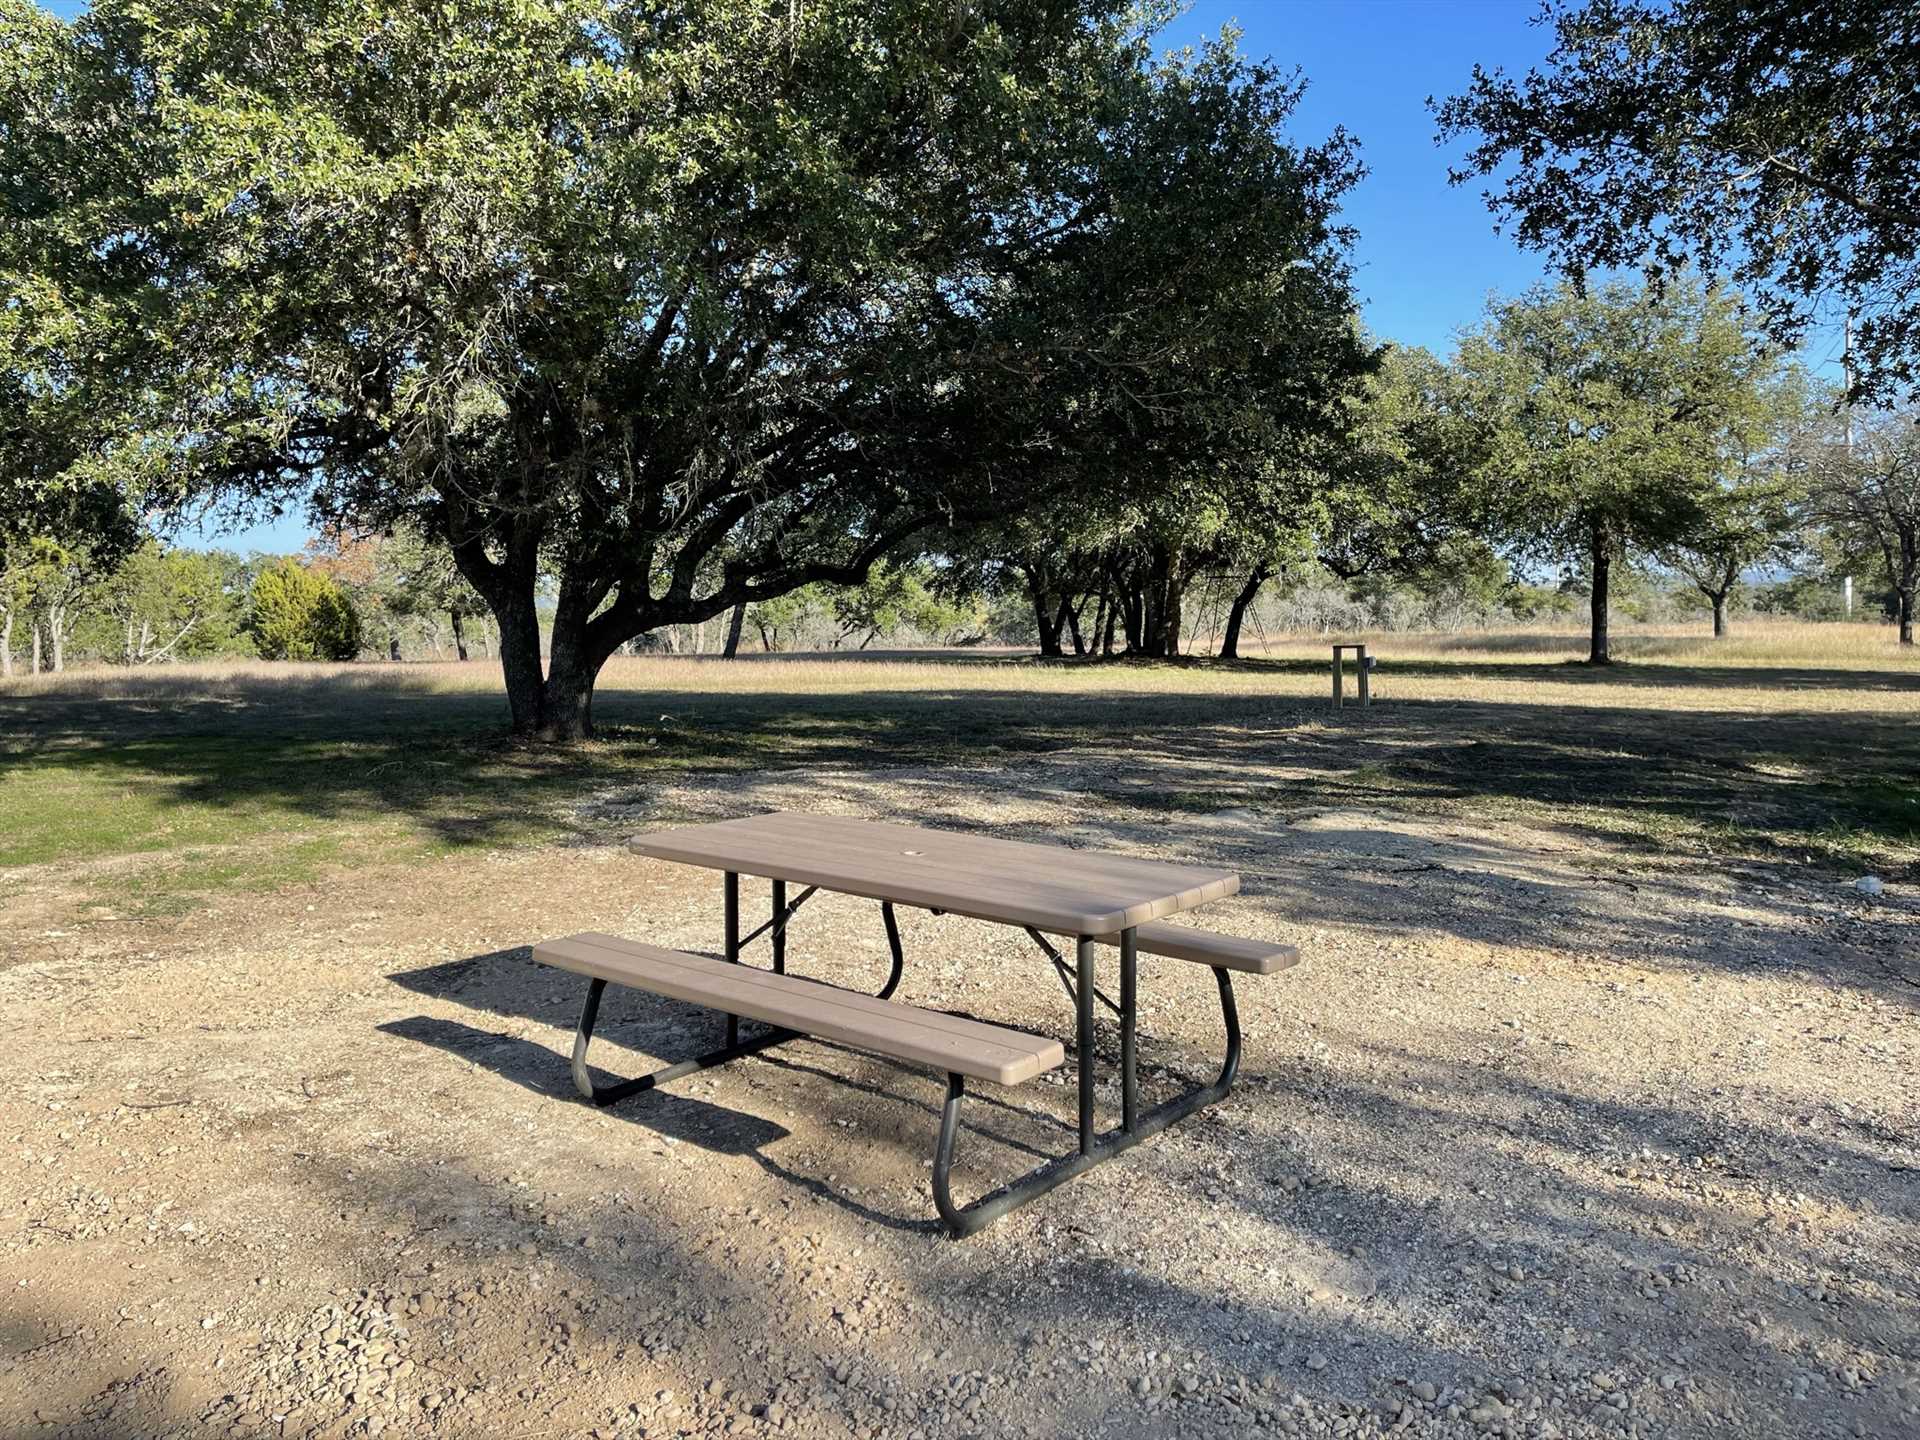                                                 Your outdoor space at the Great Heart Ranch Edwards Cabin includes a horseshoe pit, so warm up your throwing arm!